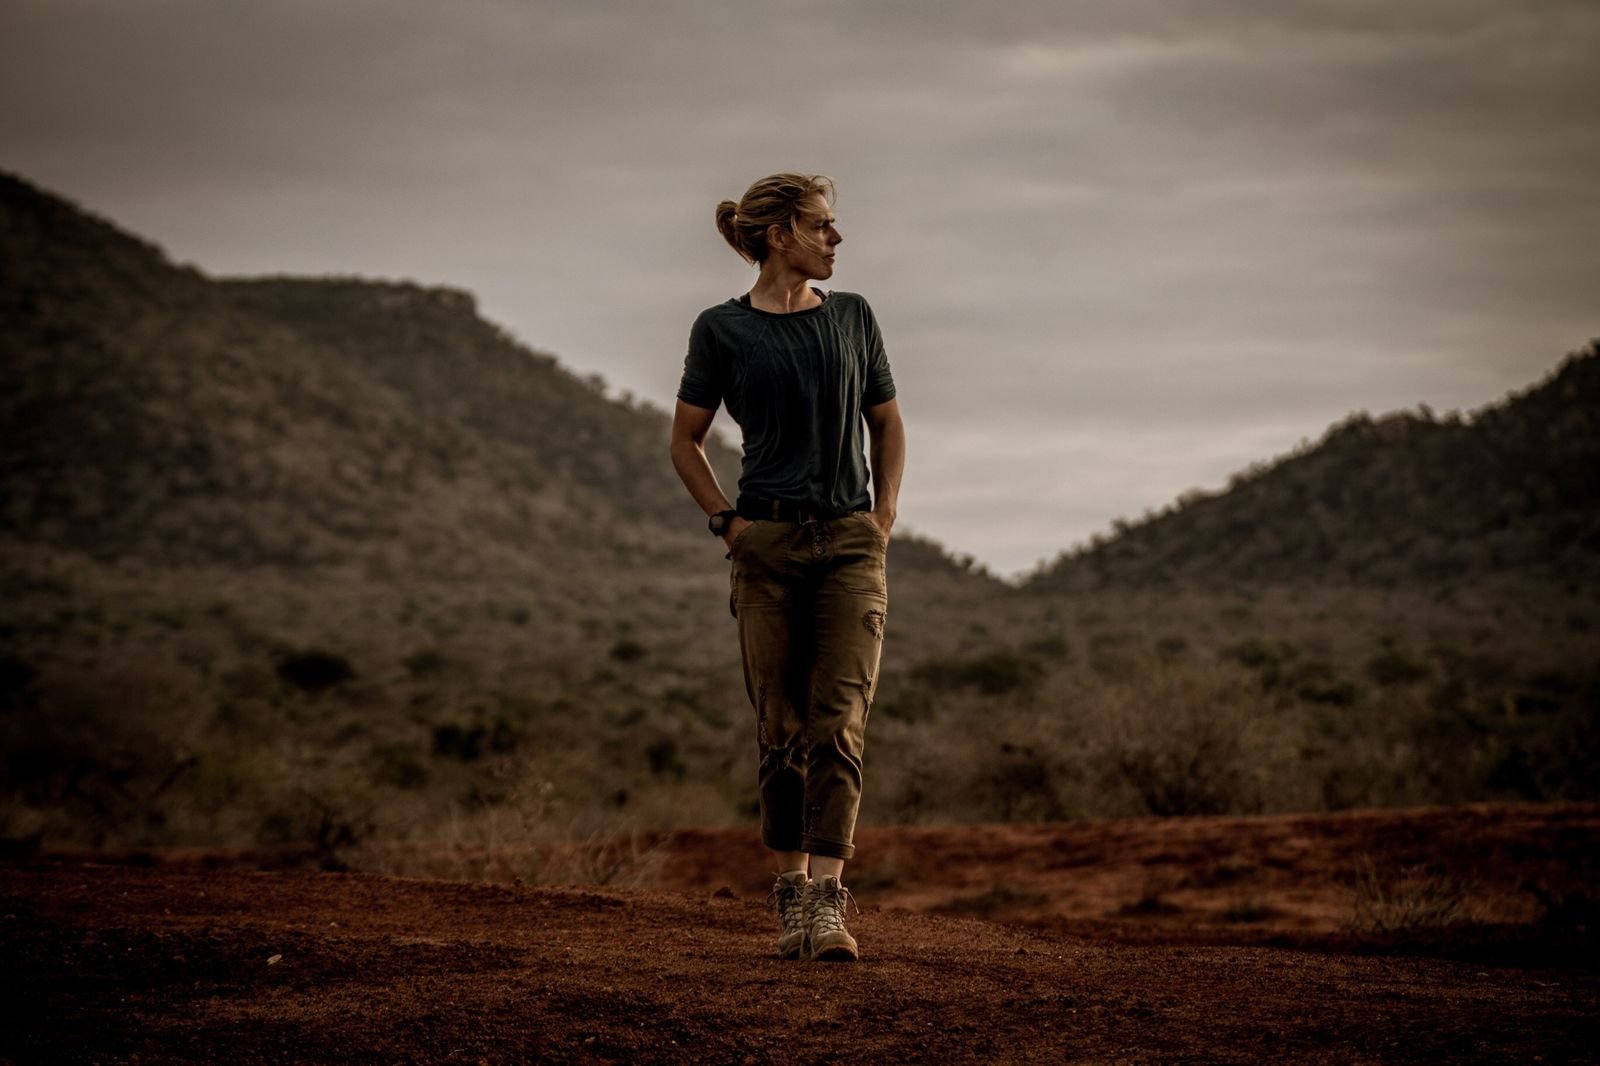 “I had always been the only girl out climbing with the guys. I never thought it was weird.” Megan Hine, adventurer